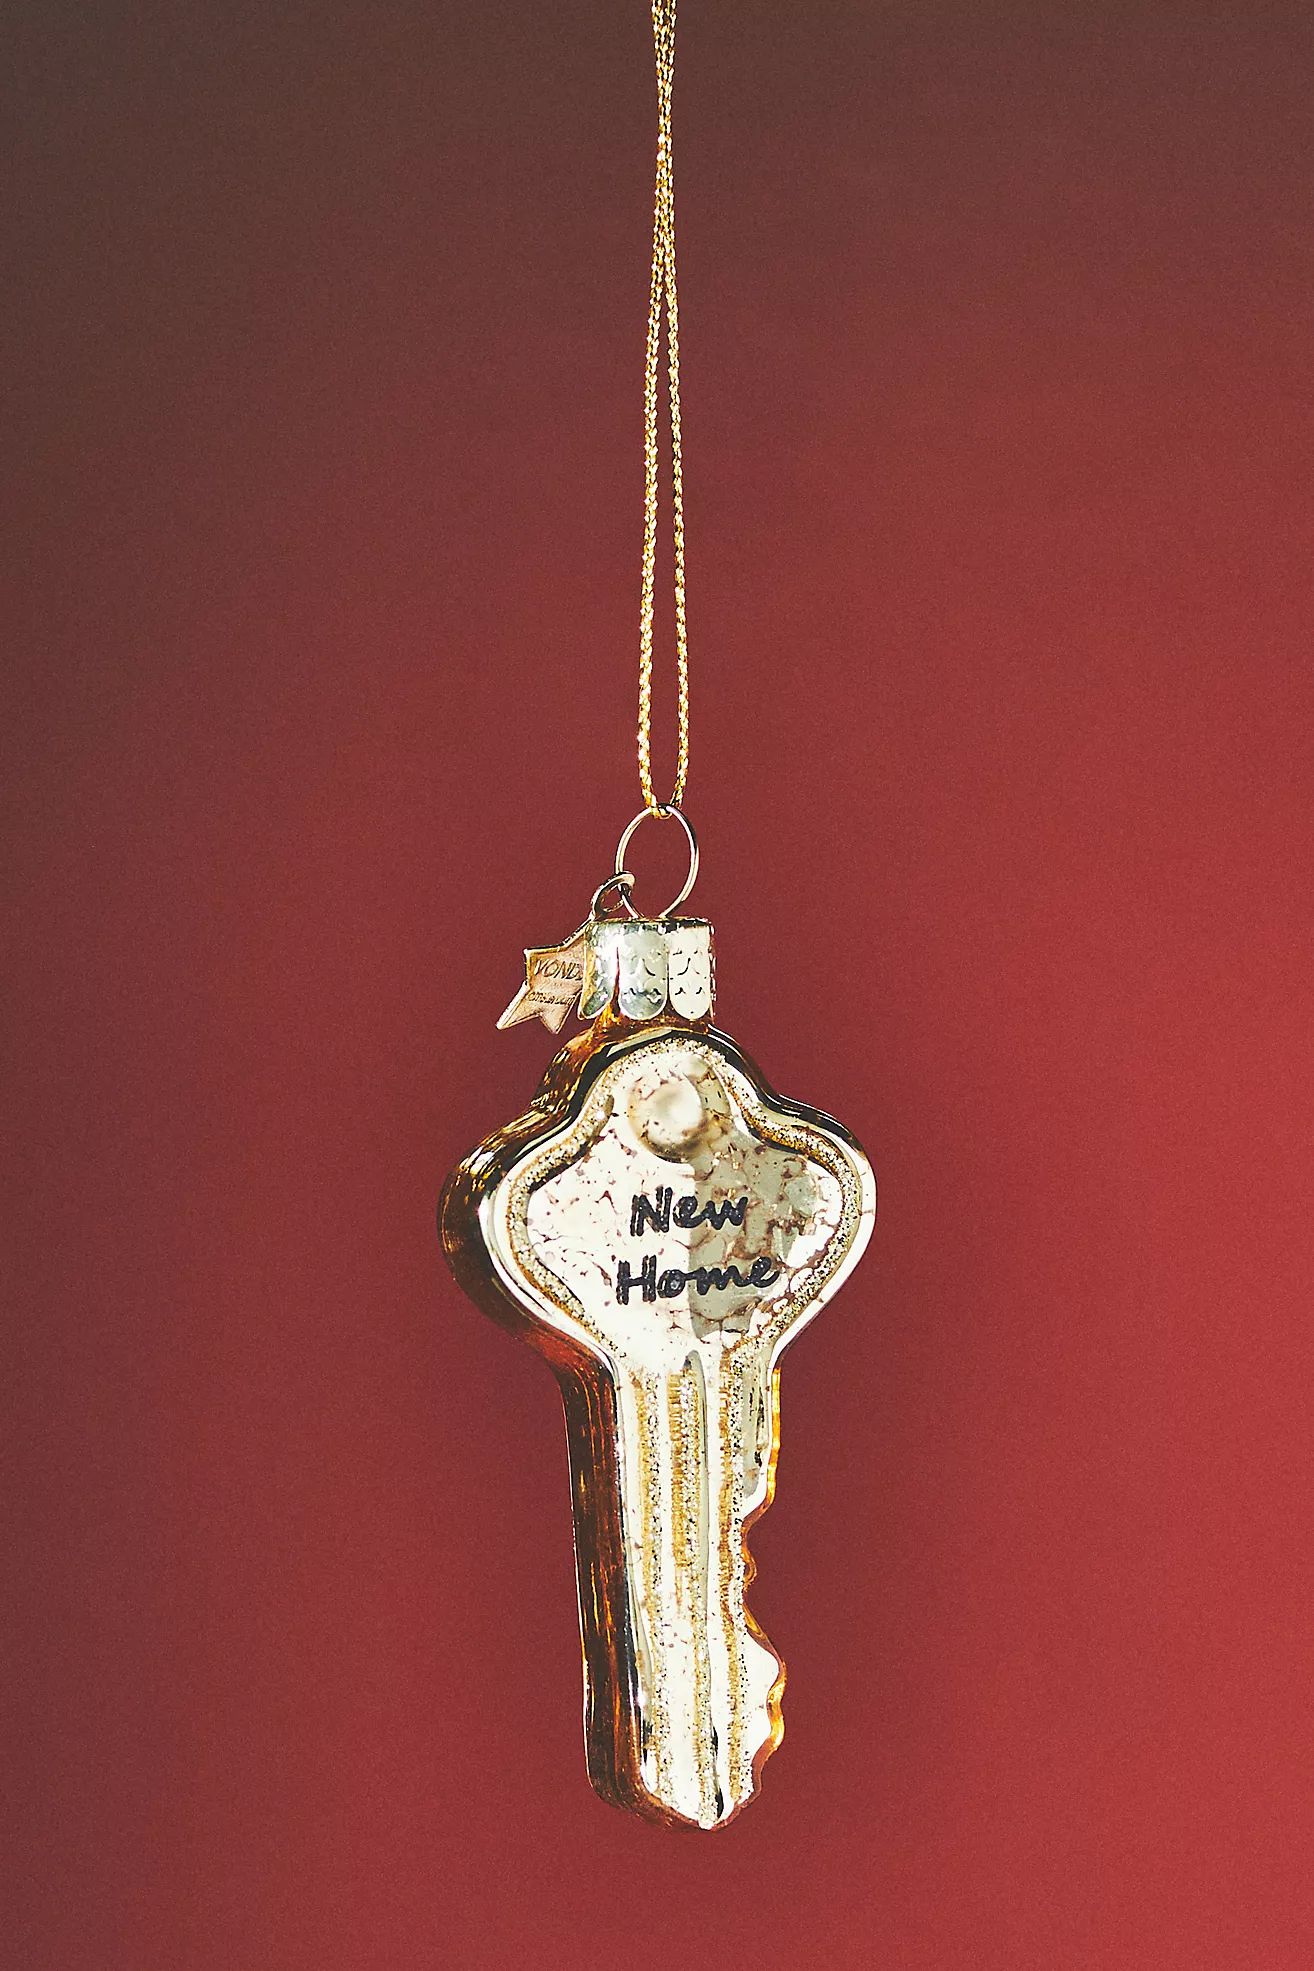 New Home Key Ornament | Anthropologie (US)